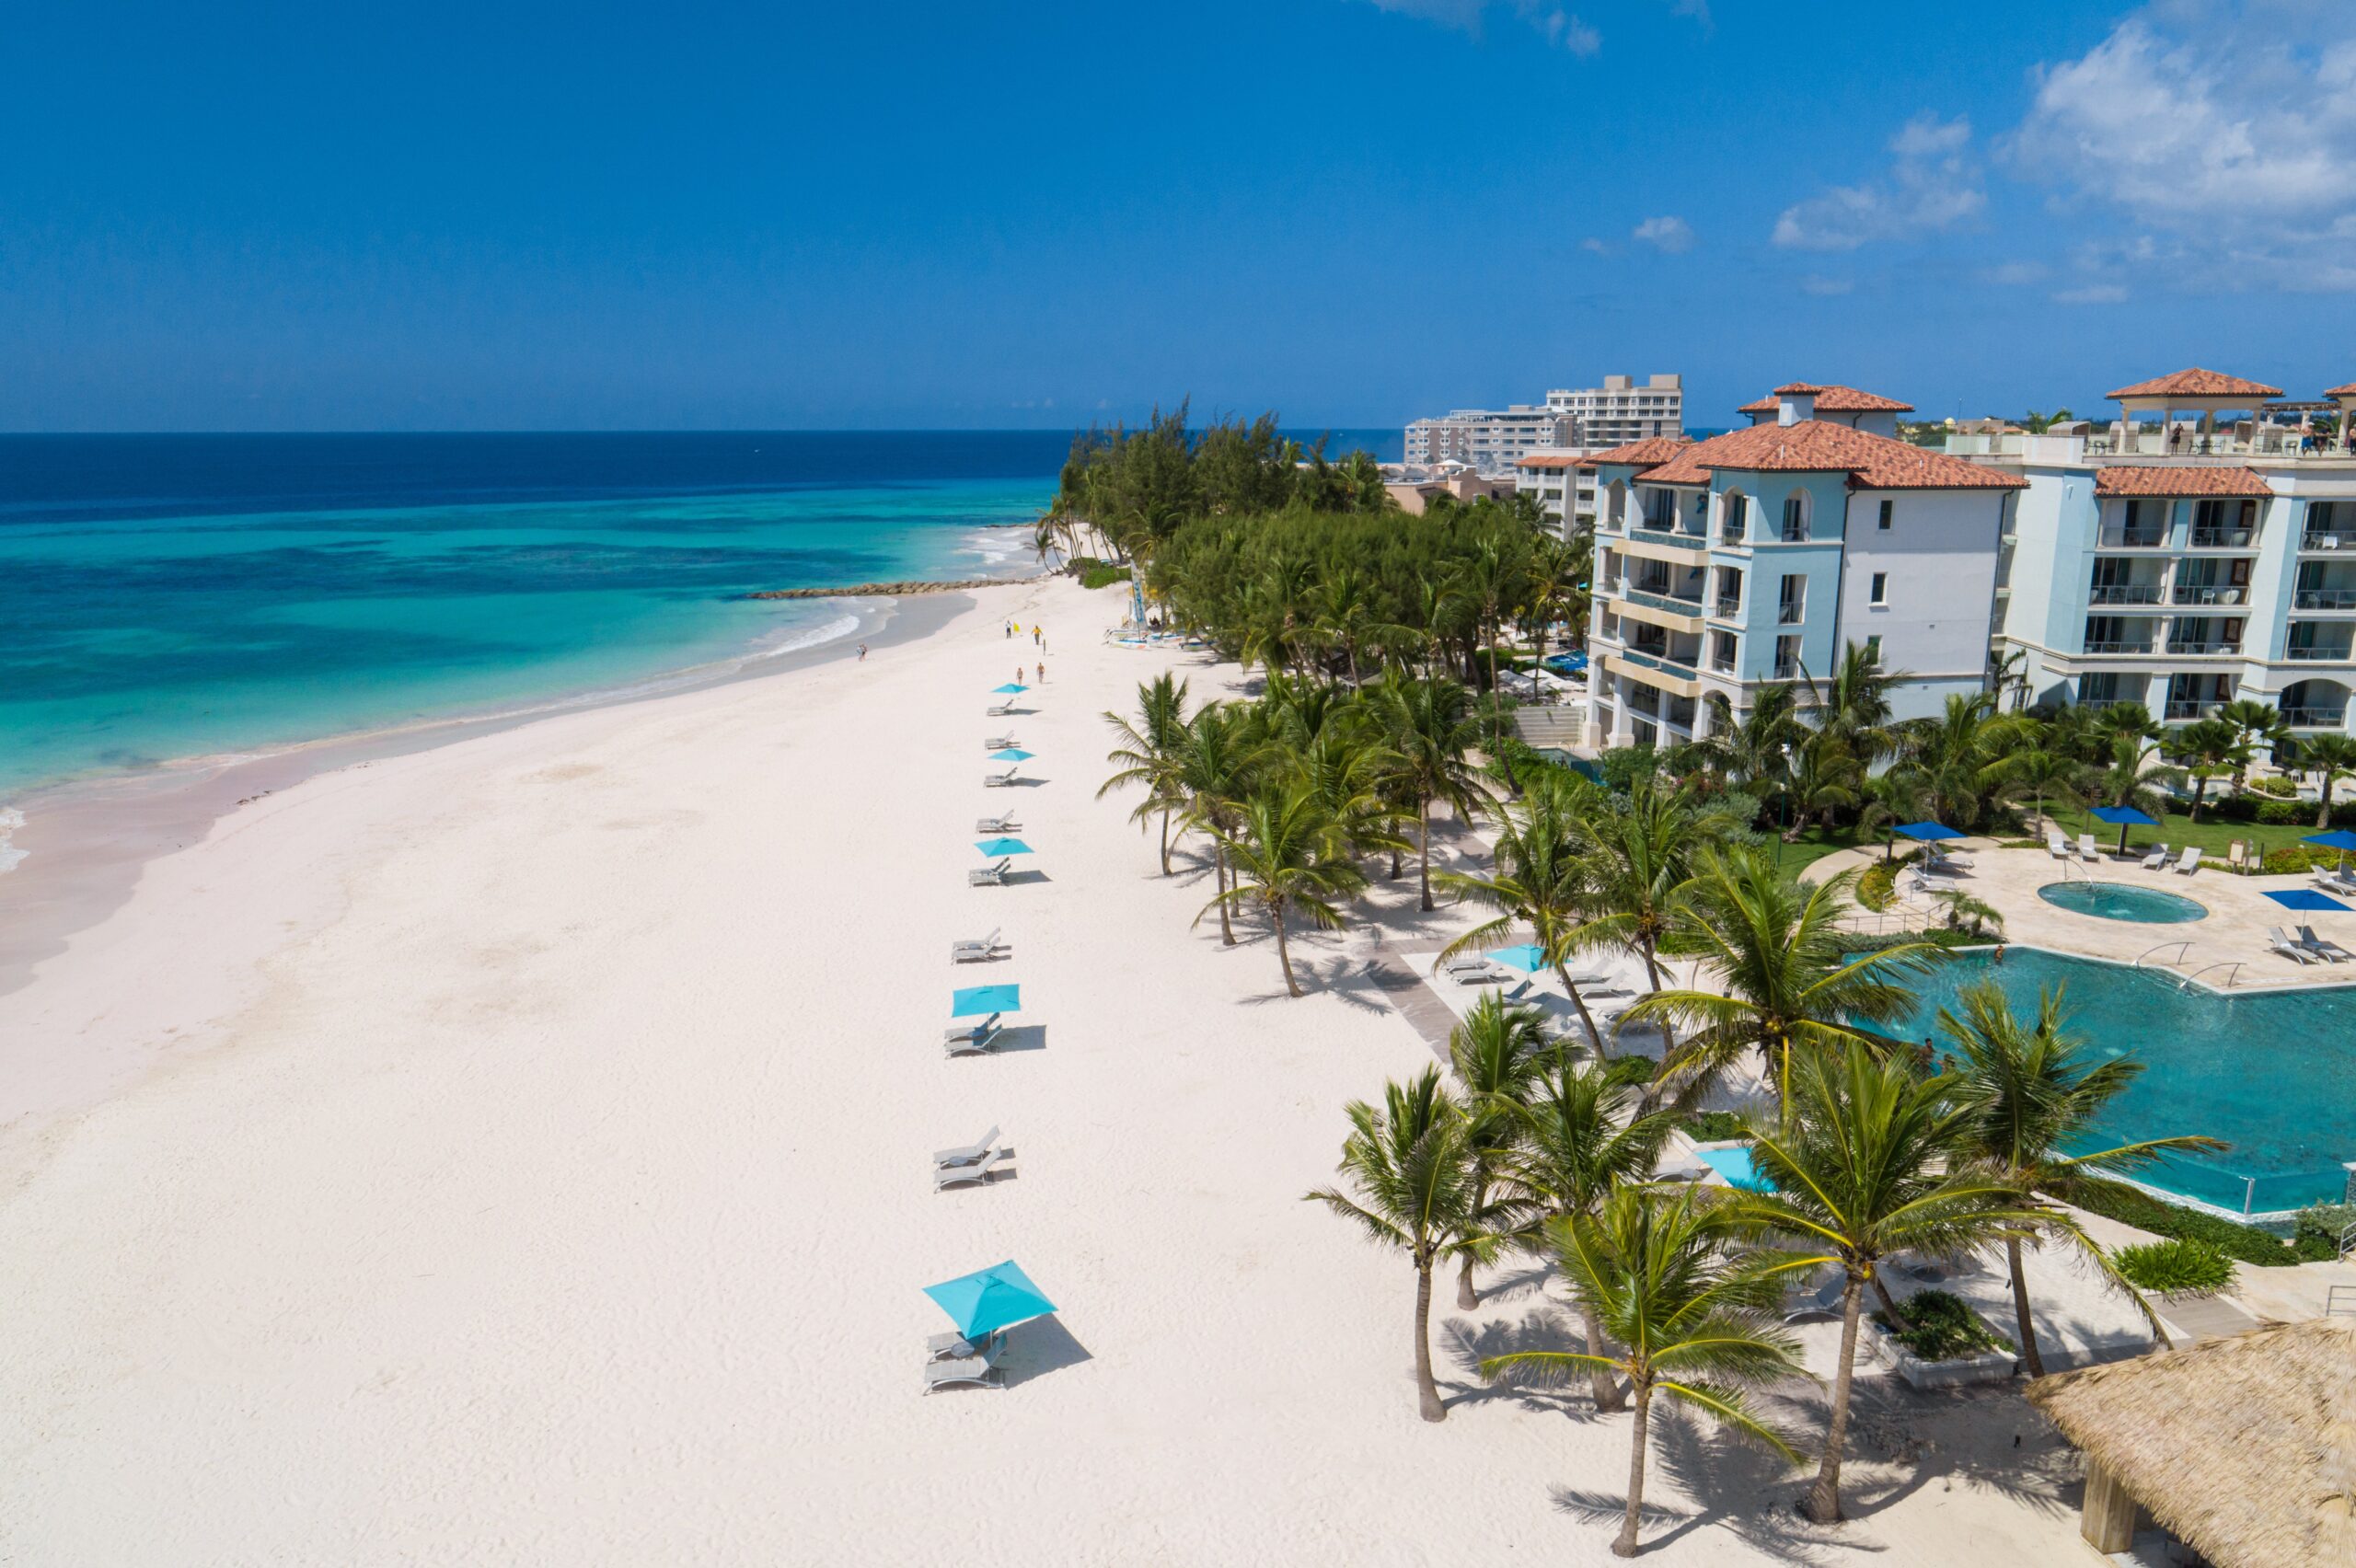 Set in beautiful beachside locations, Sandals resorts allow you to to maximise your R&R